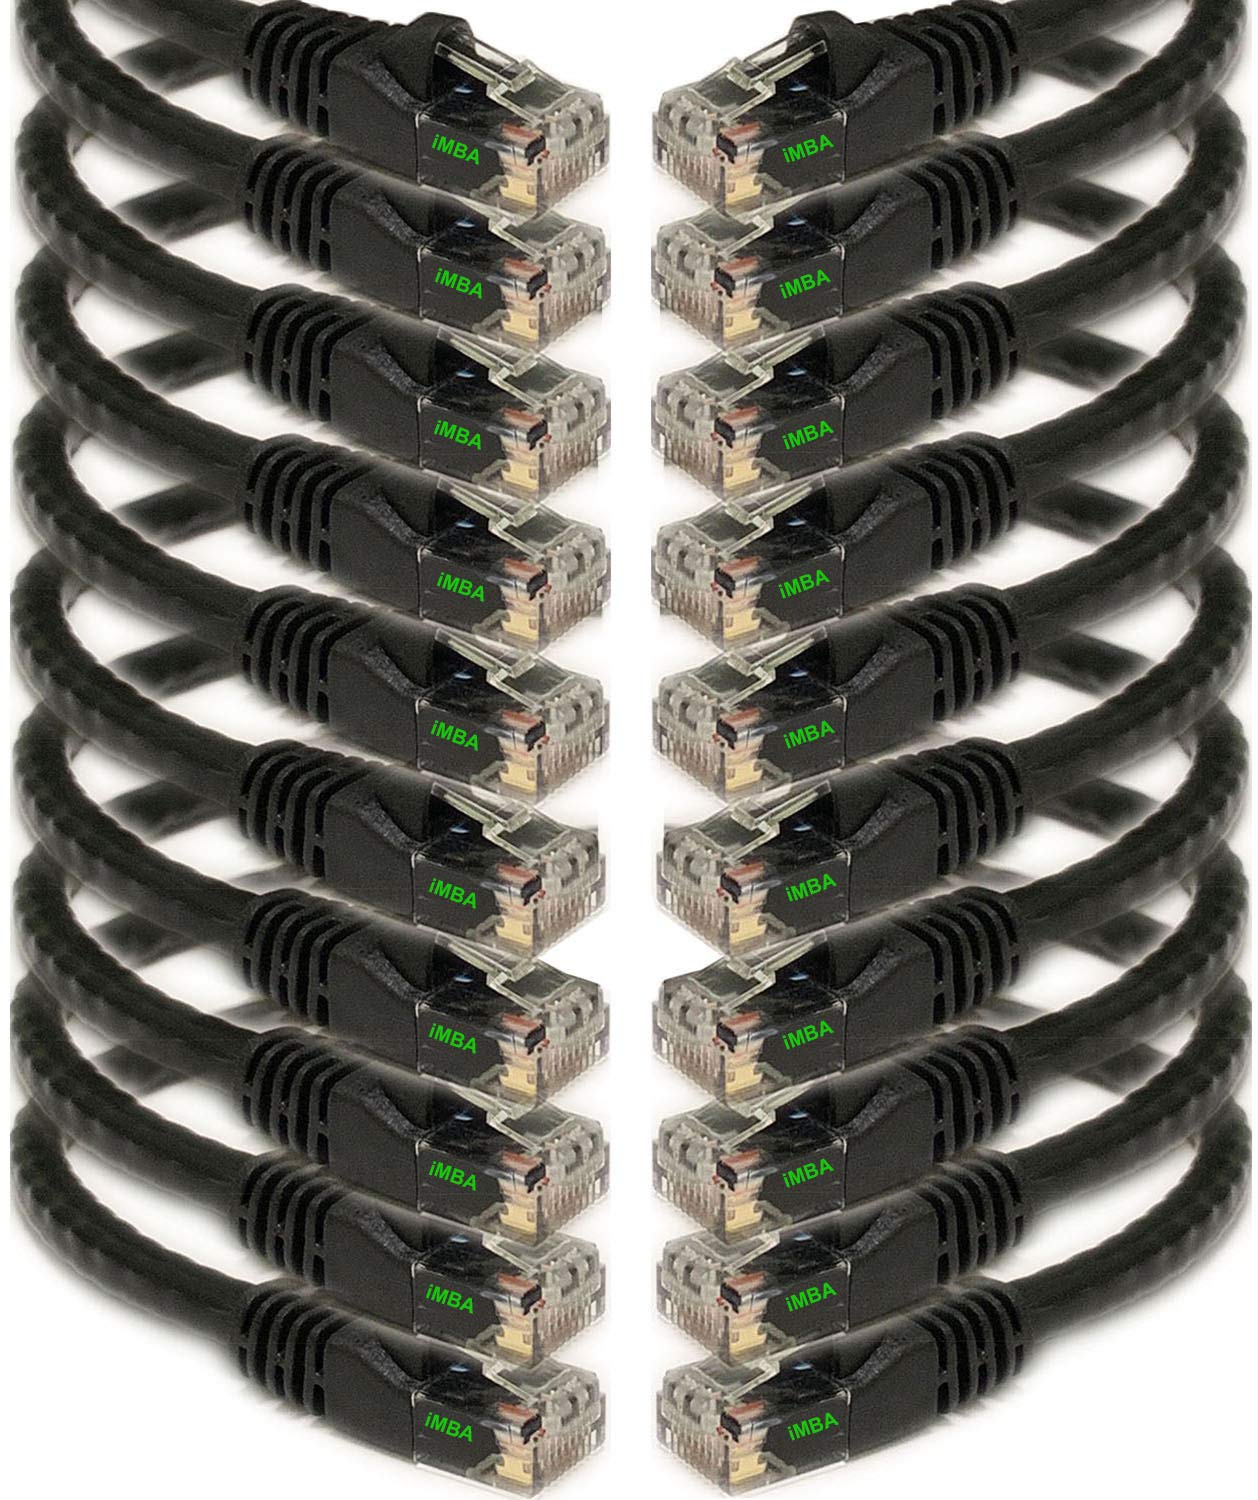 Book Cover iMBAPrice 3' Cat5e Network Ethernet Patch Cable, 10 Pack, Black (IMBA-CAT5-03BK-10PK) 3 Feet Black